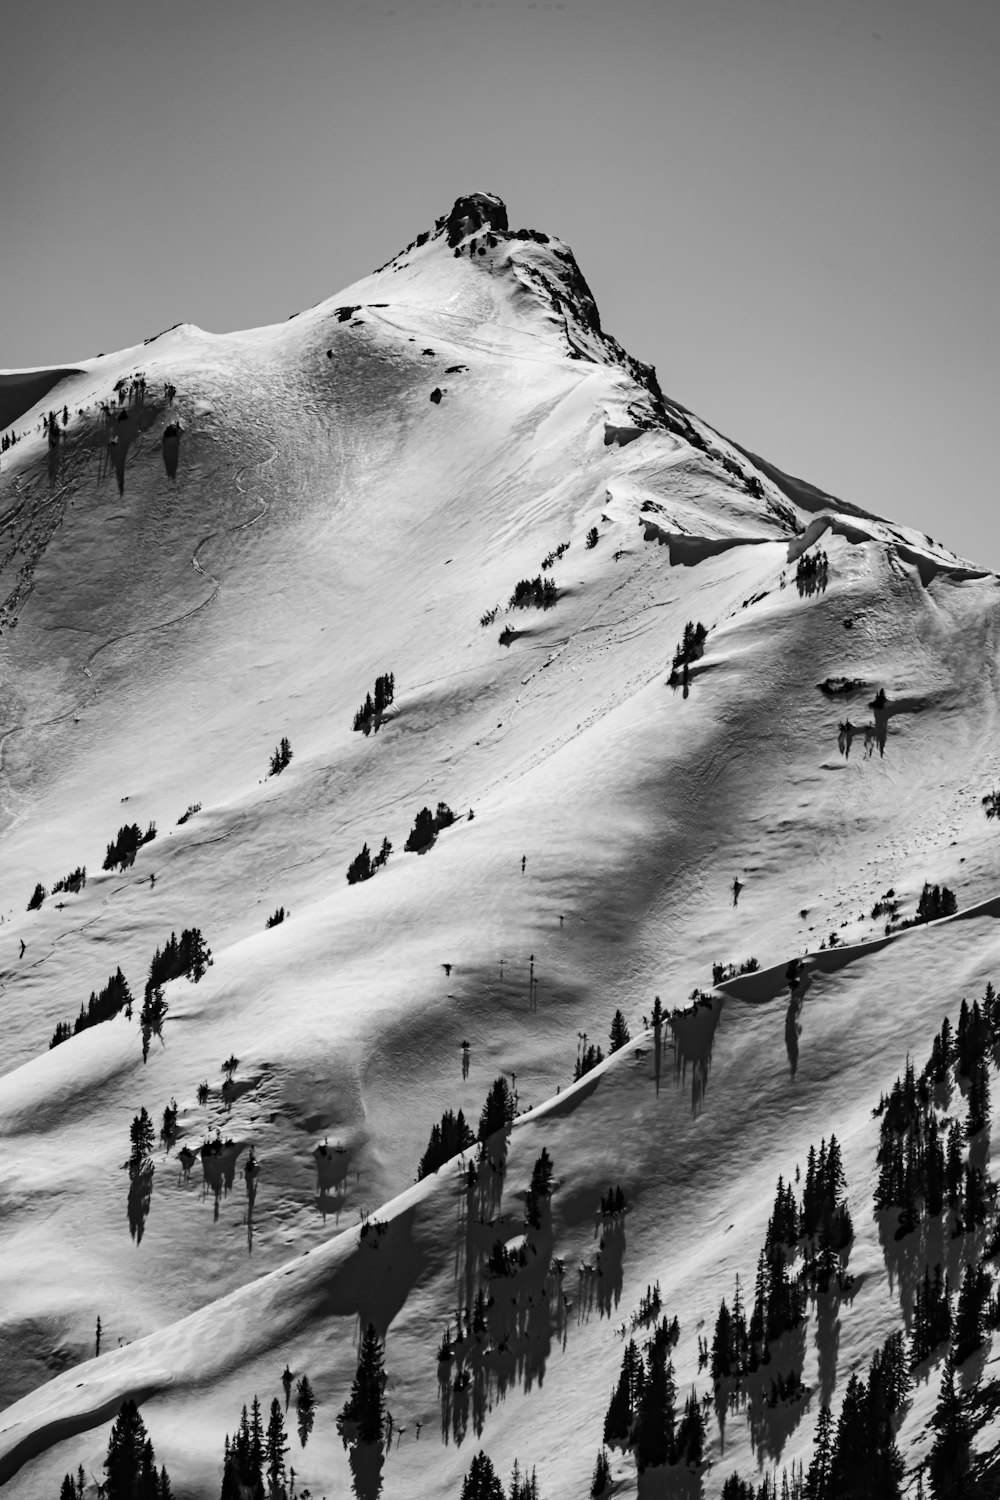 grayscale photo of people walking on snow covered mountain